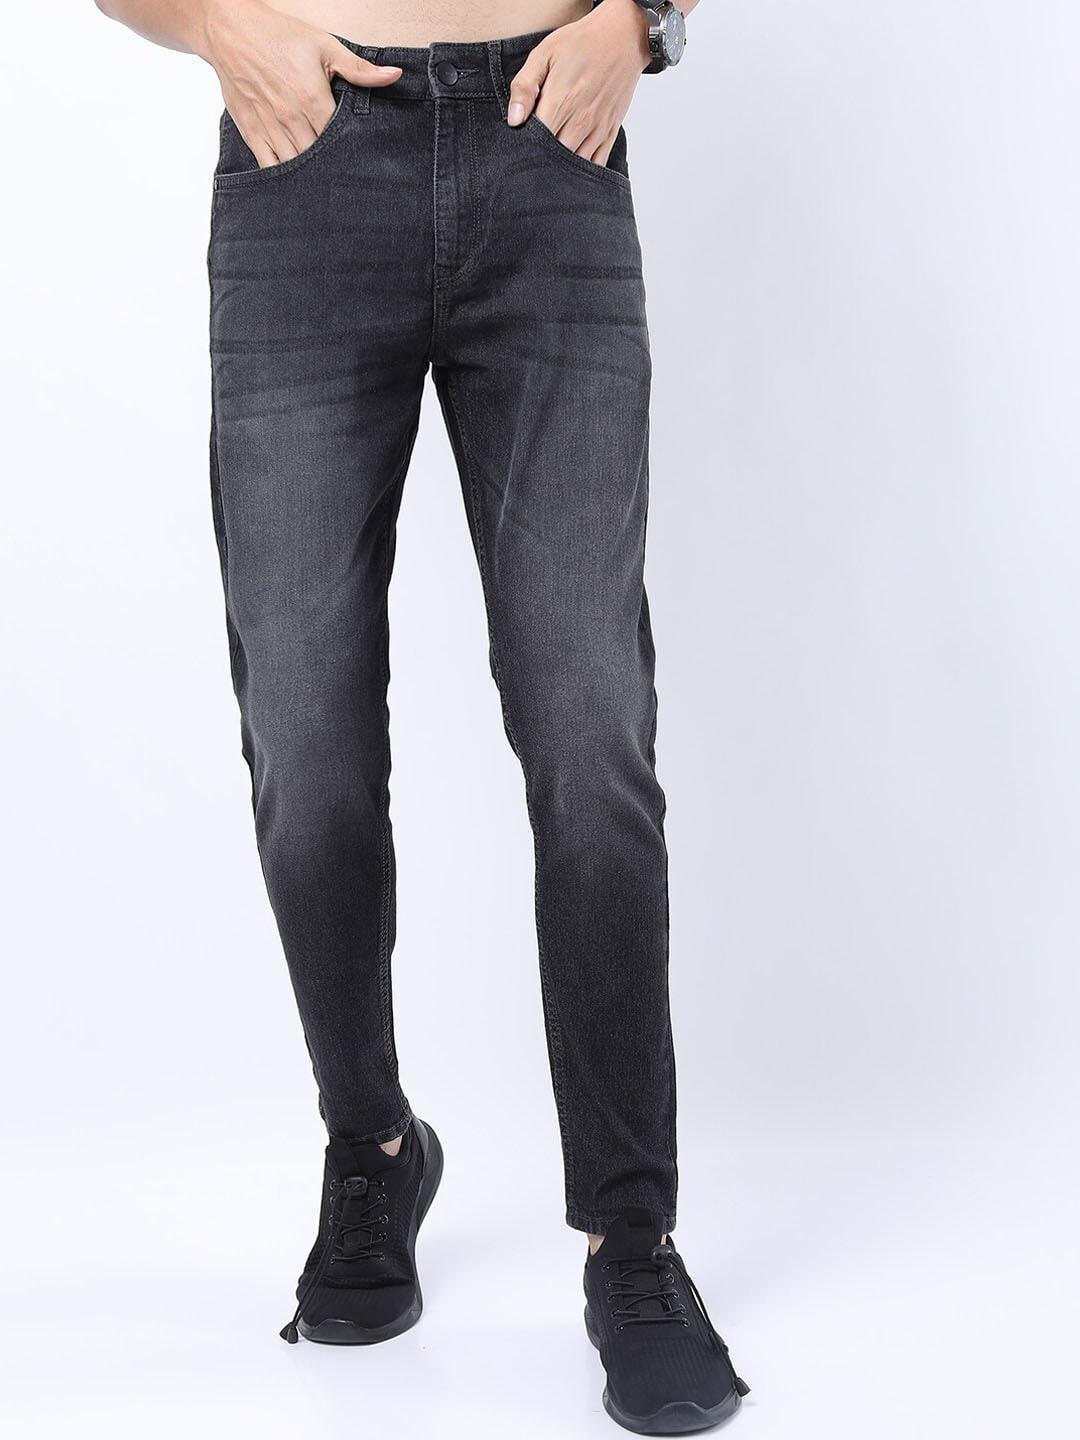 KETCH Men Charcoal Tapered Fit Clean Look Light Fade Stretchable Jeans